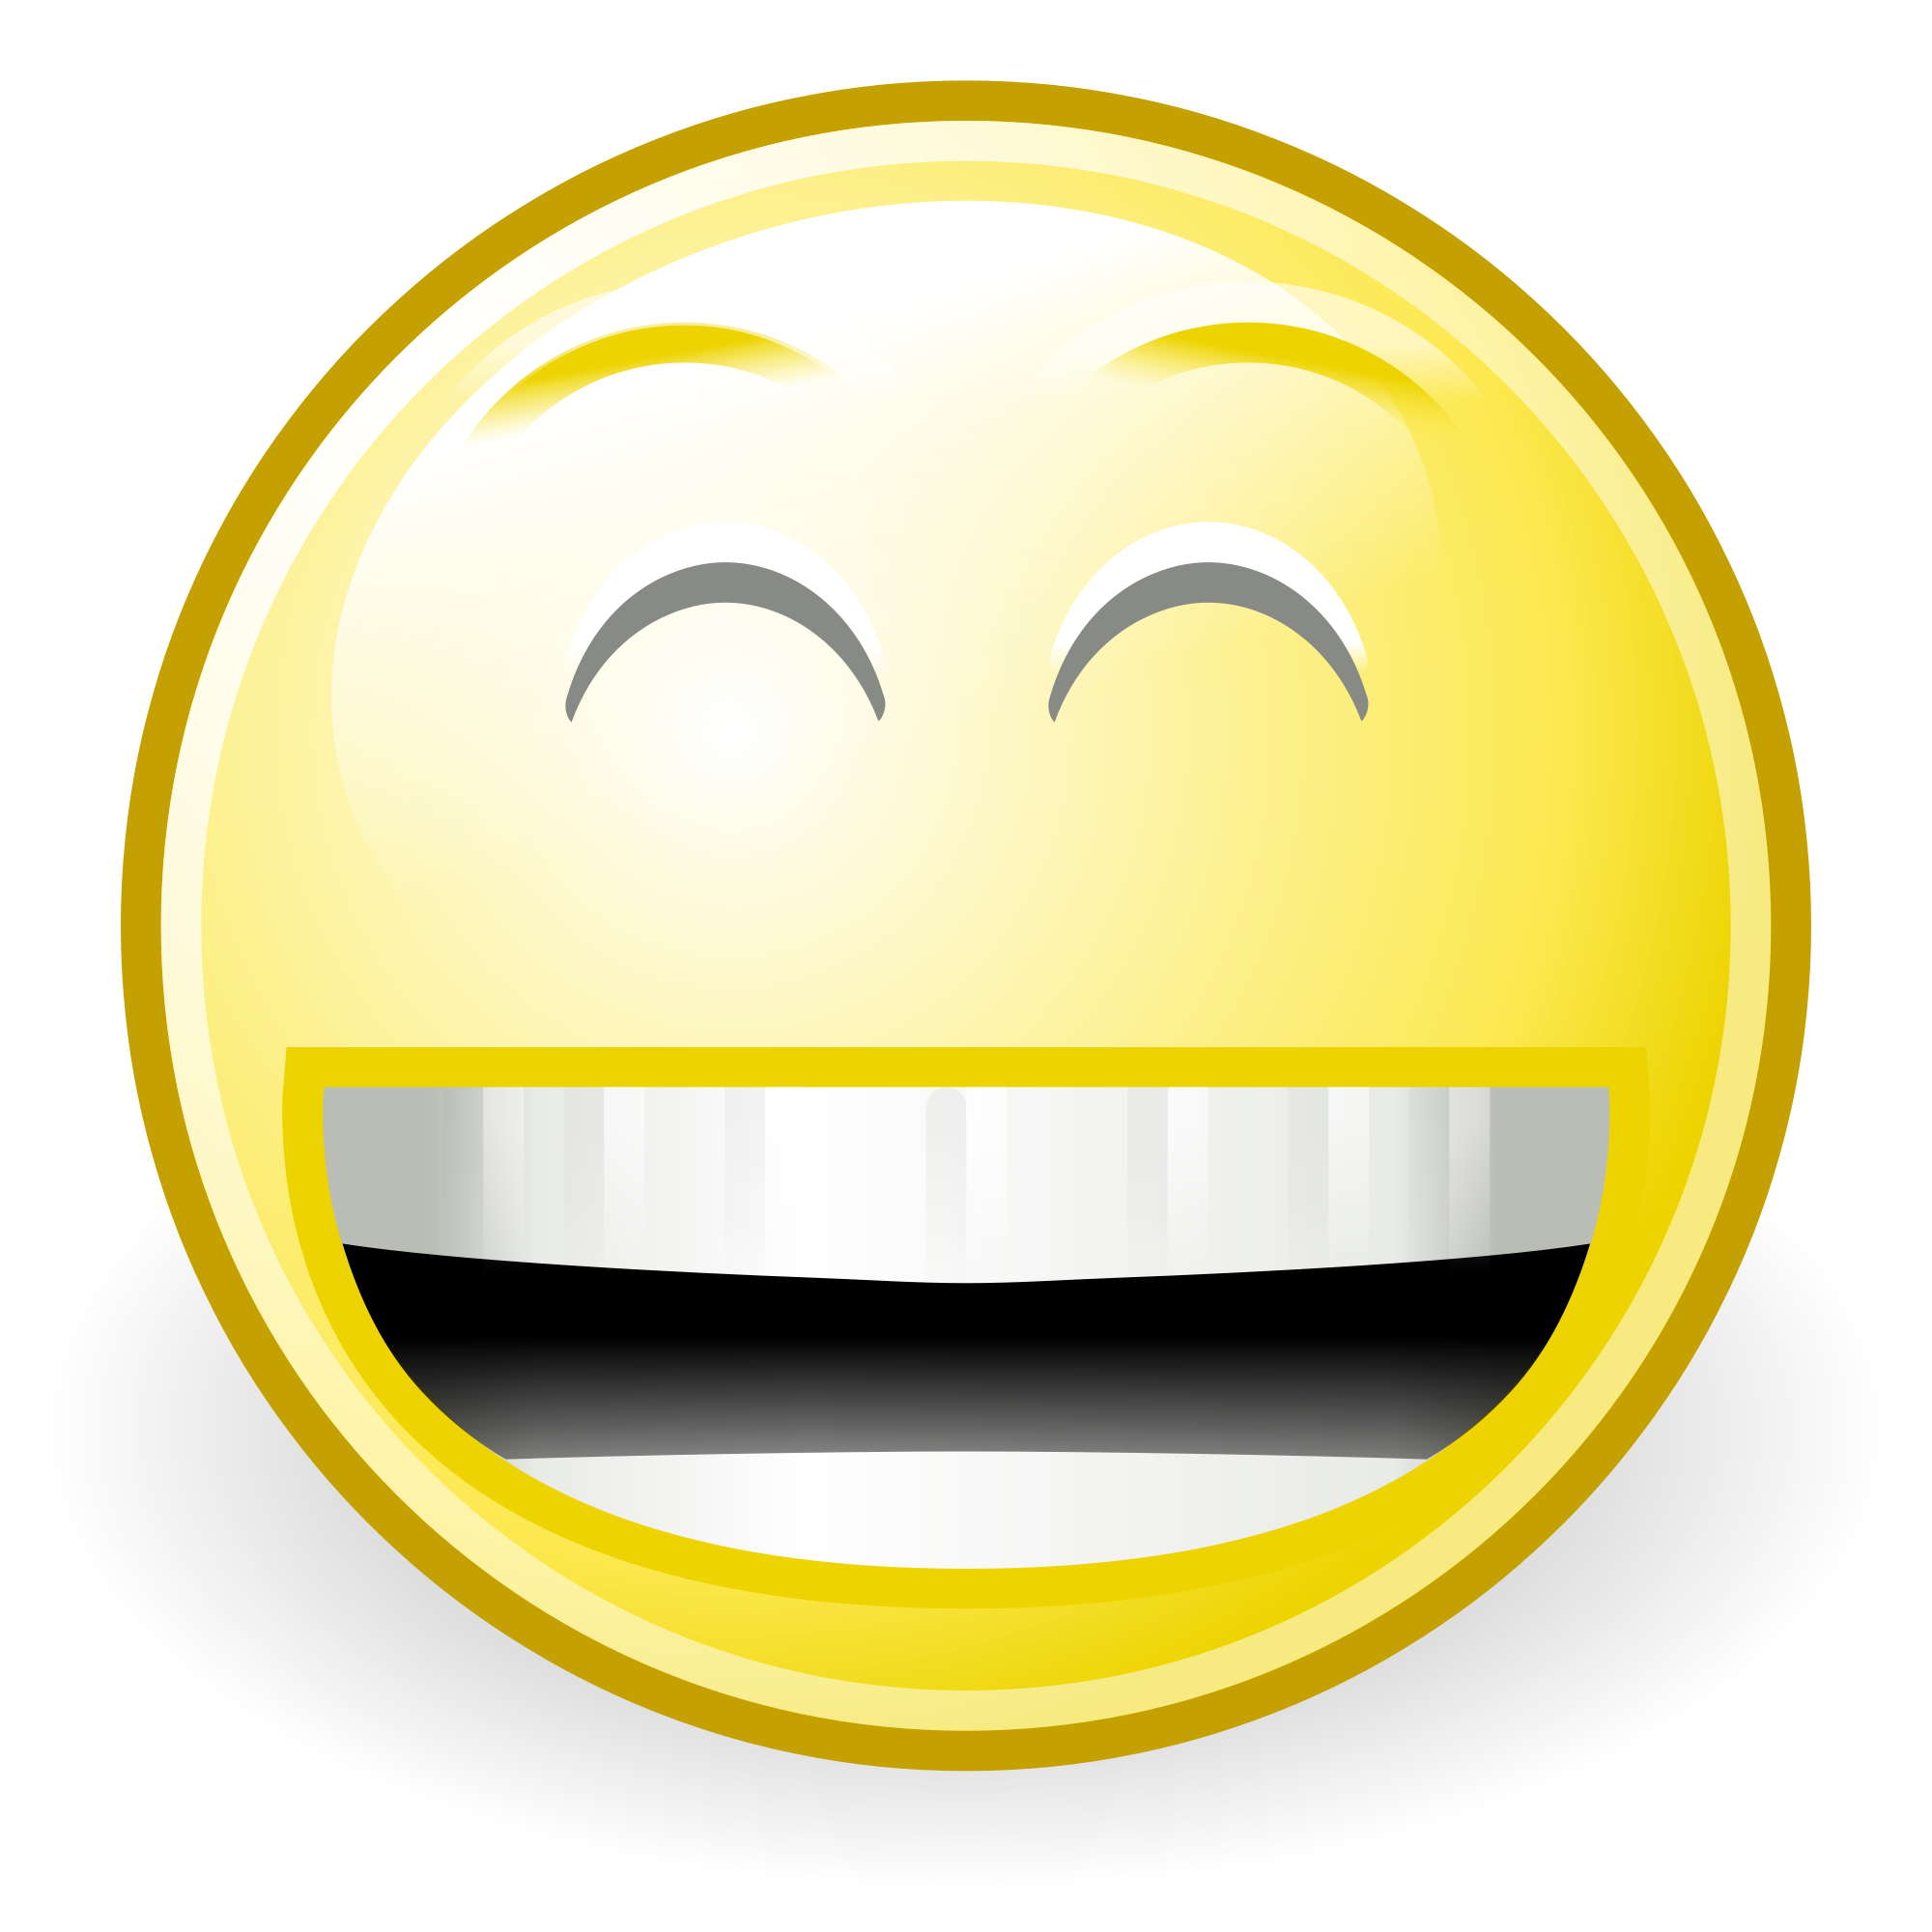 Free Funny Laughing Face Cartoon Download Free Funny Laughing Face